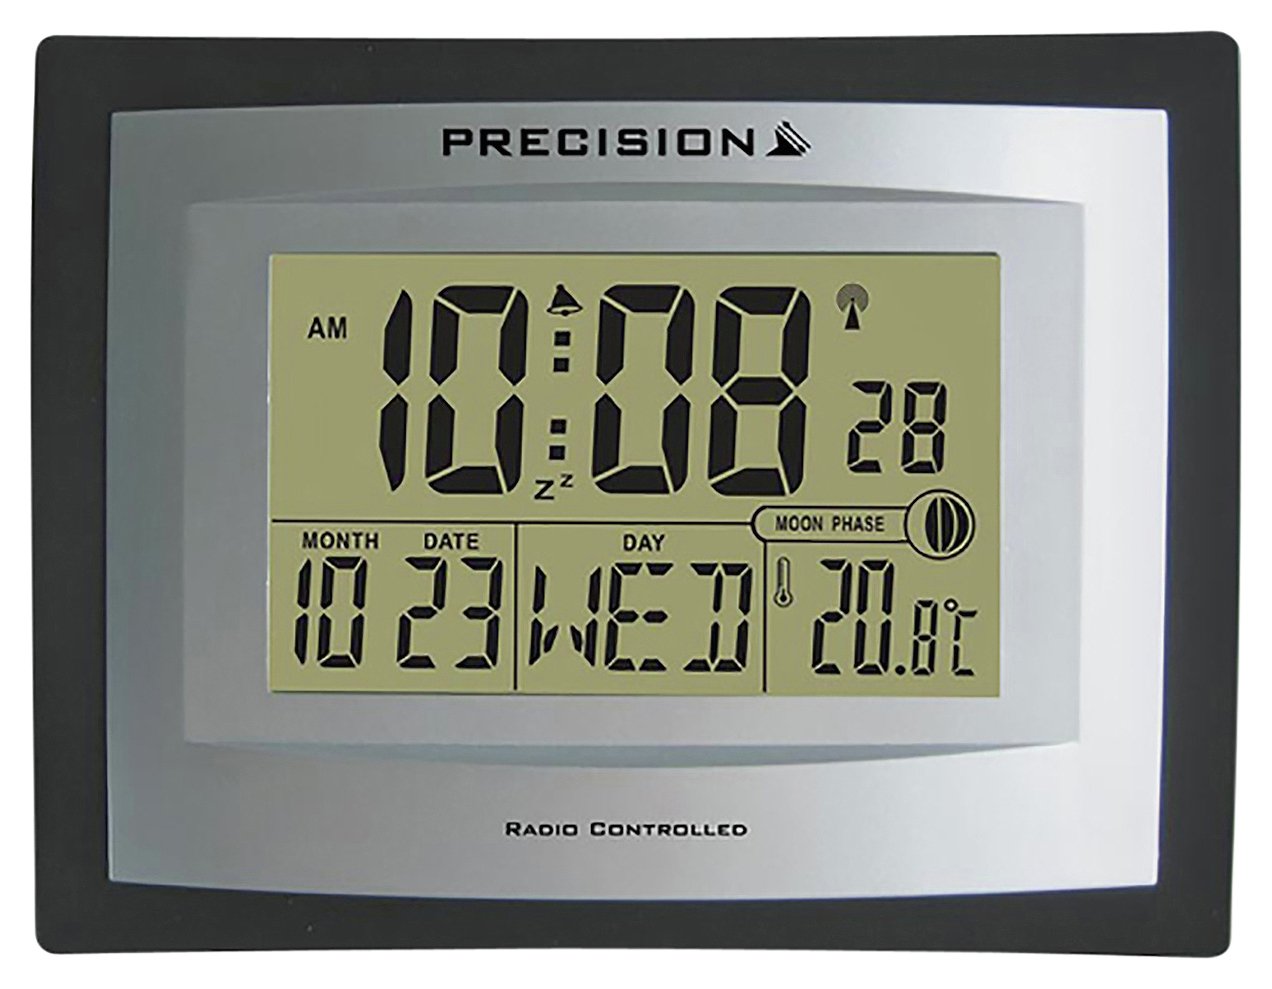 Precision LCD Radio Controlled Clock Review